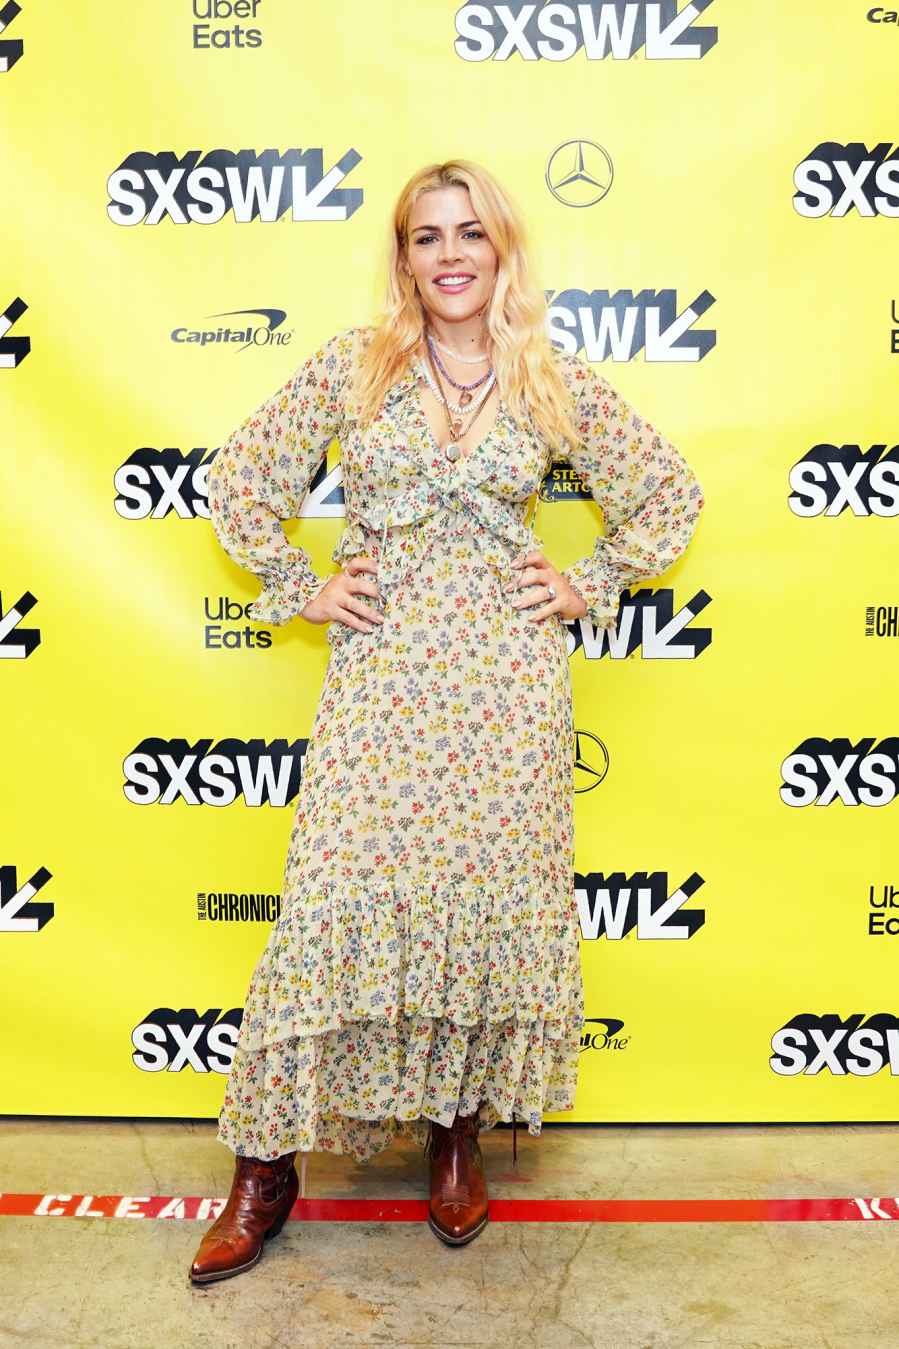 Busy Philipps The Stars Bring Their Beauty and Style A-Game to SXSW